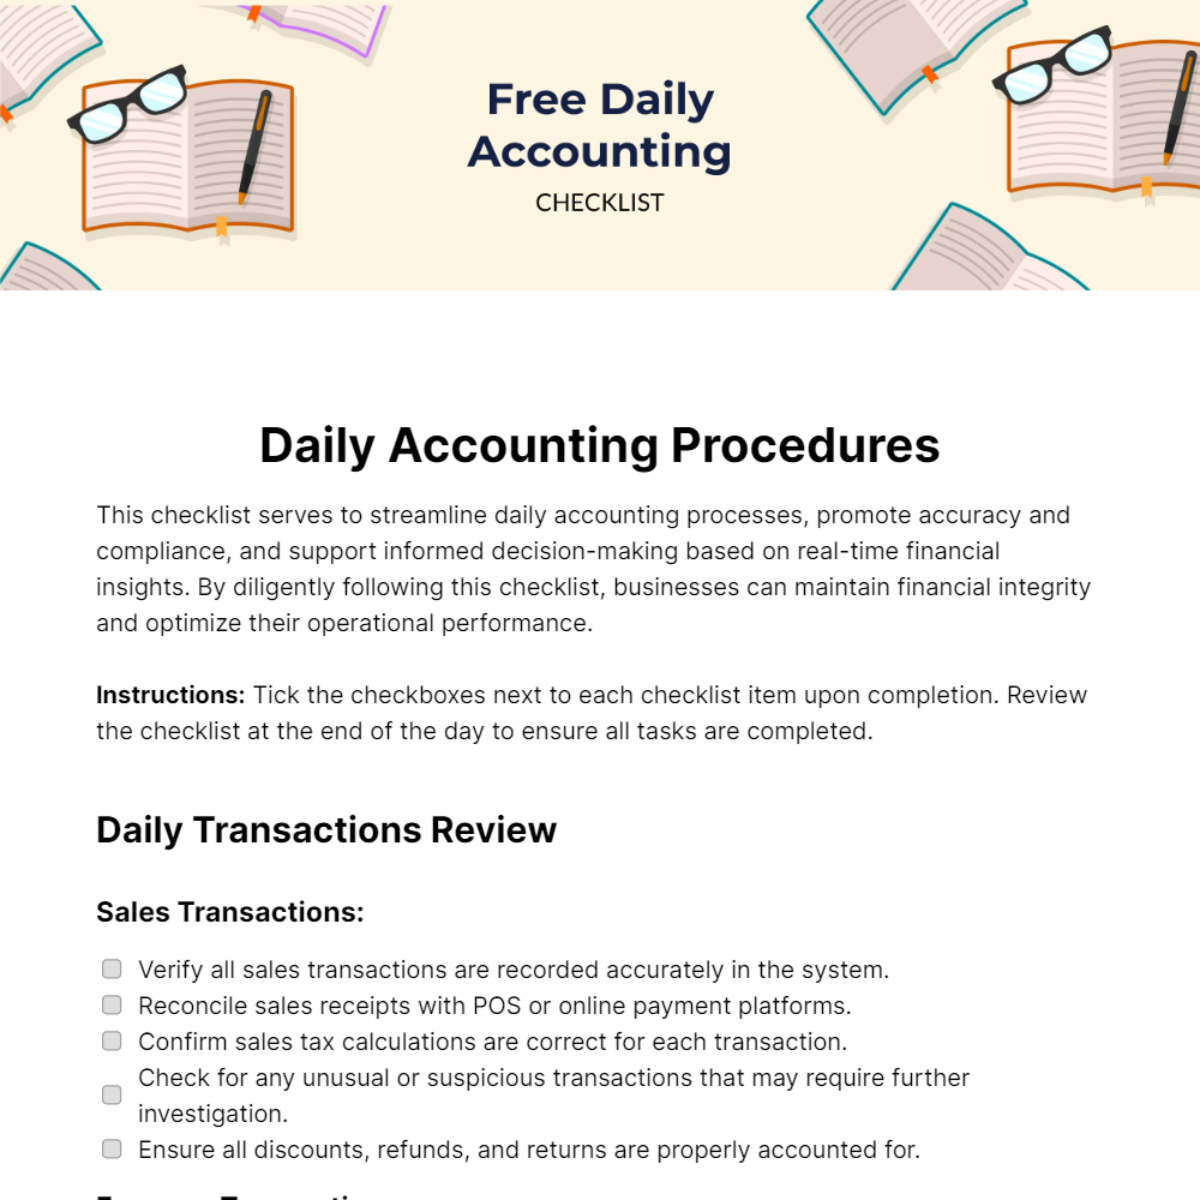 Free Daily Accounting Checklist Template